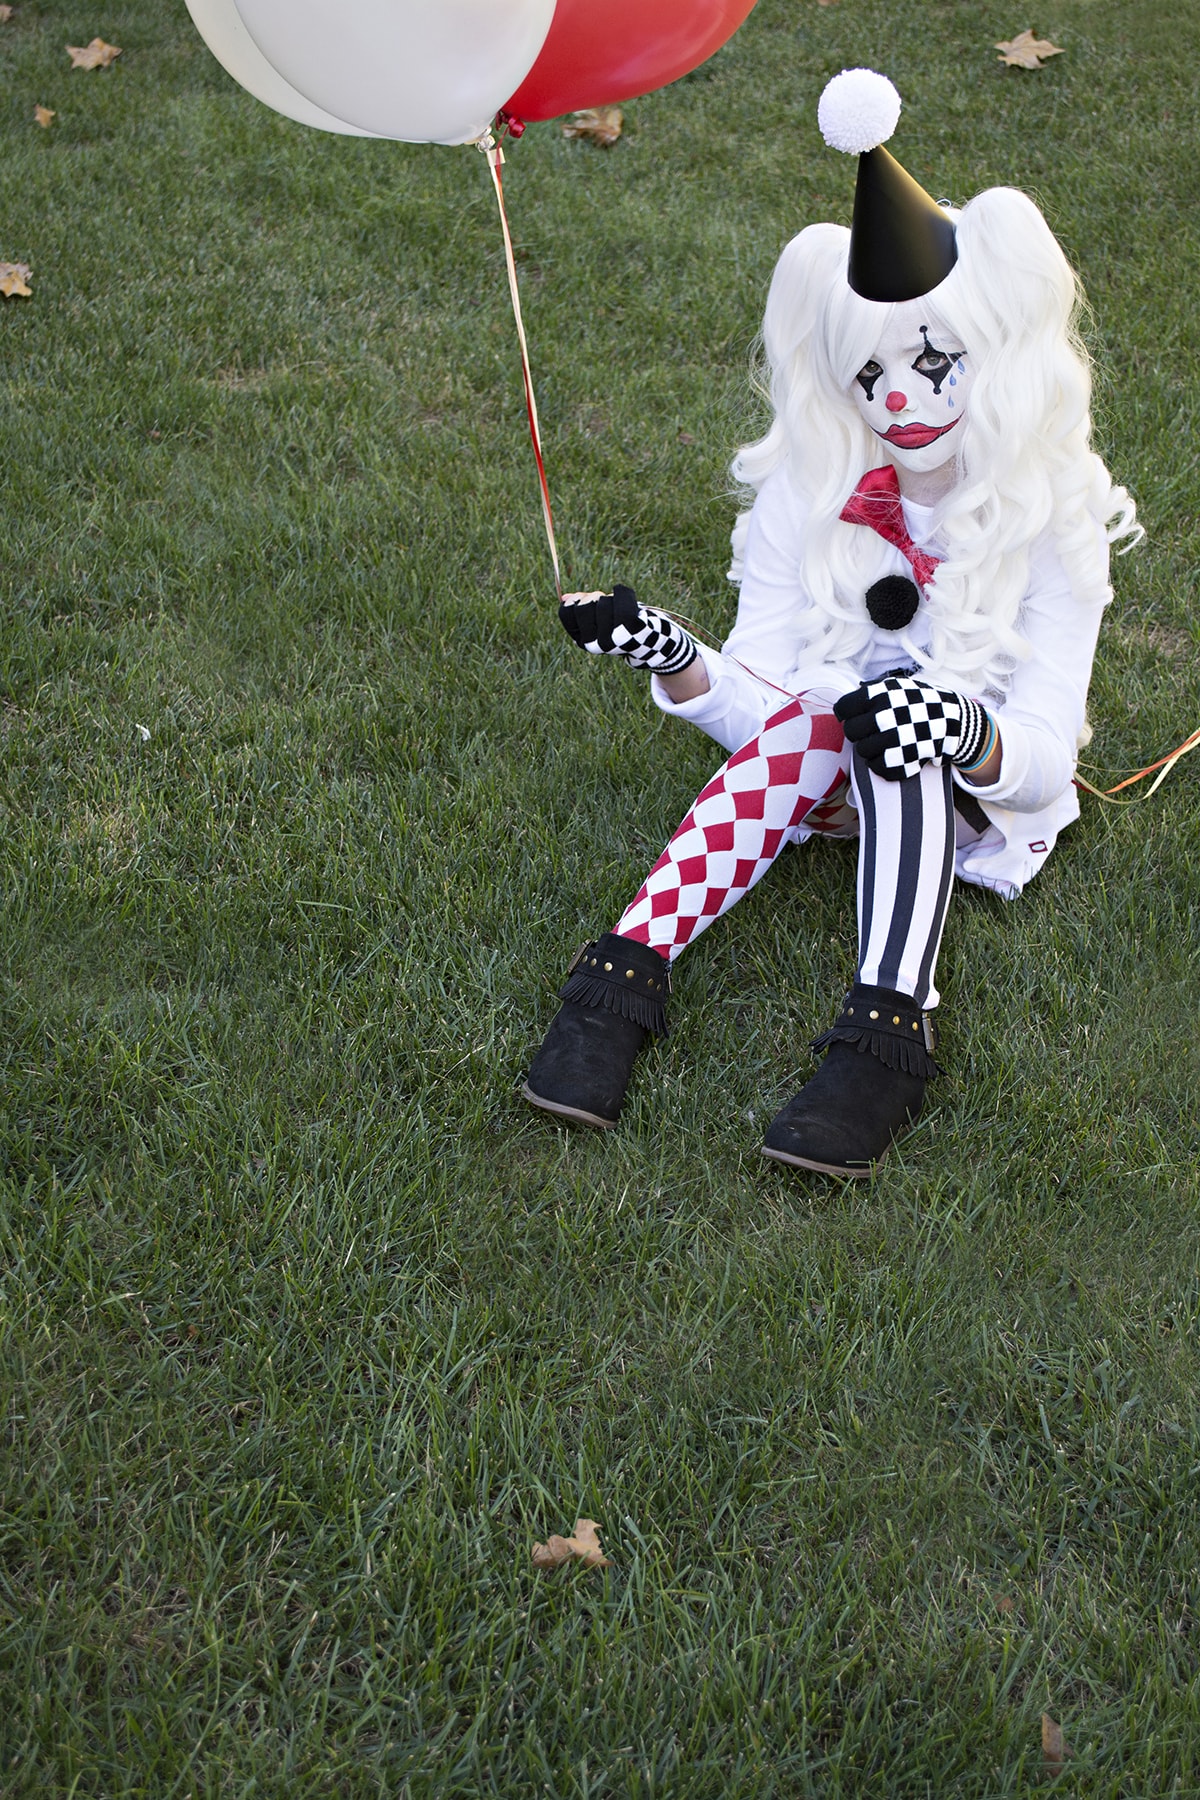 sitting on grass in Harlequin costume